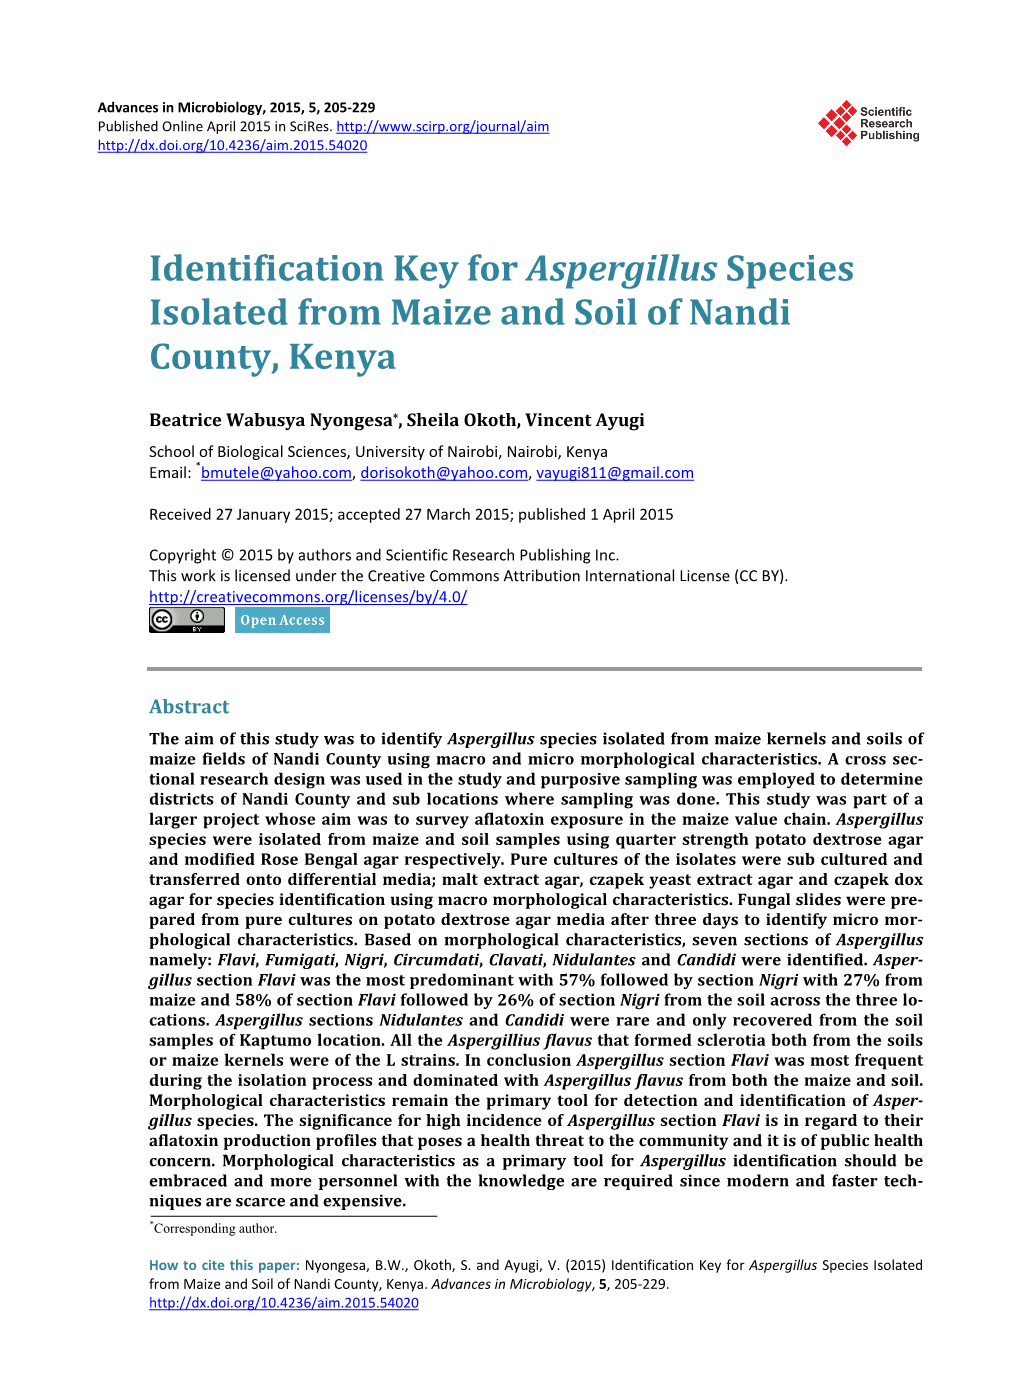 Identification Key for Aspergillus Species Isolated from Maize and Soil of Nandi County, Kenya